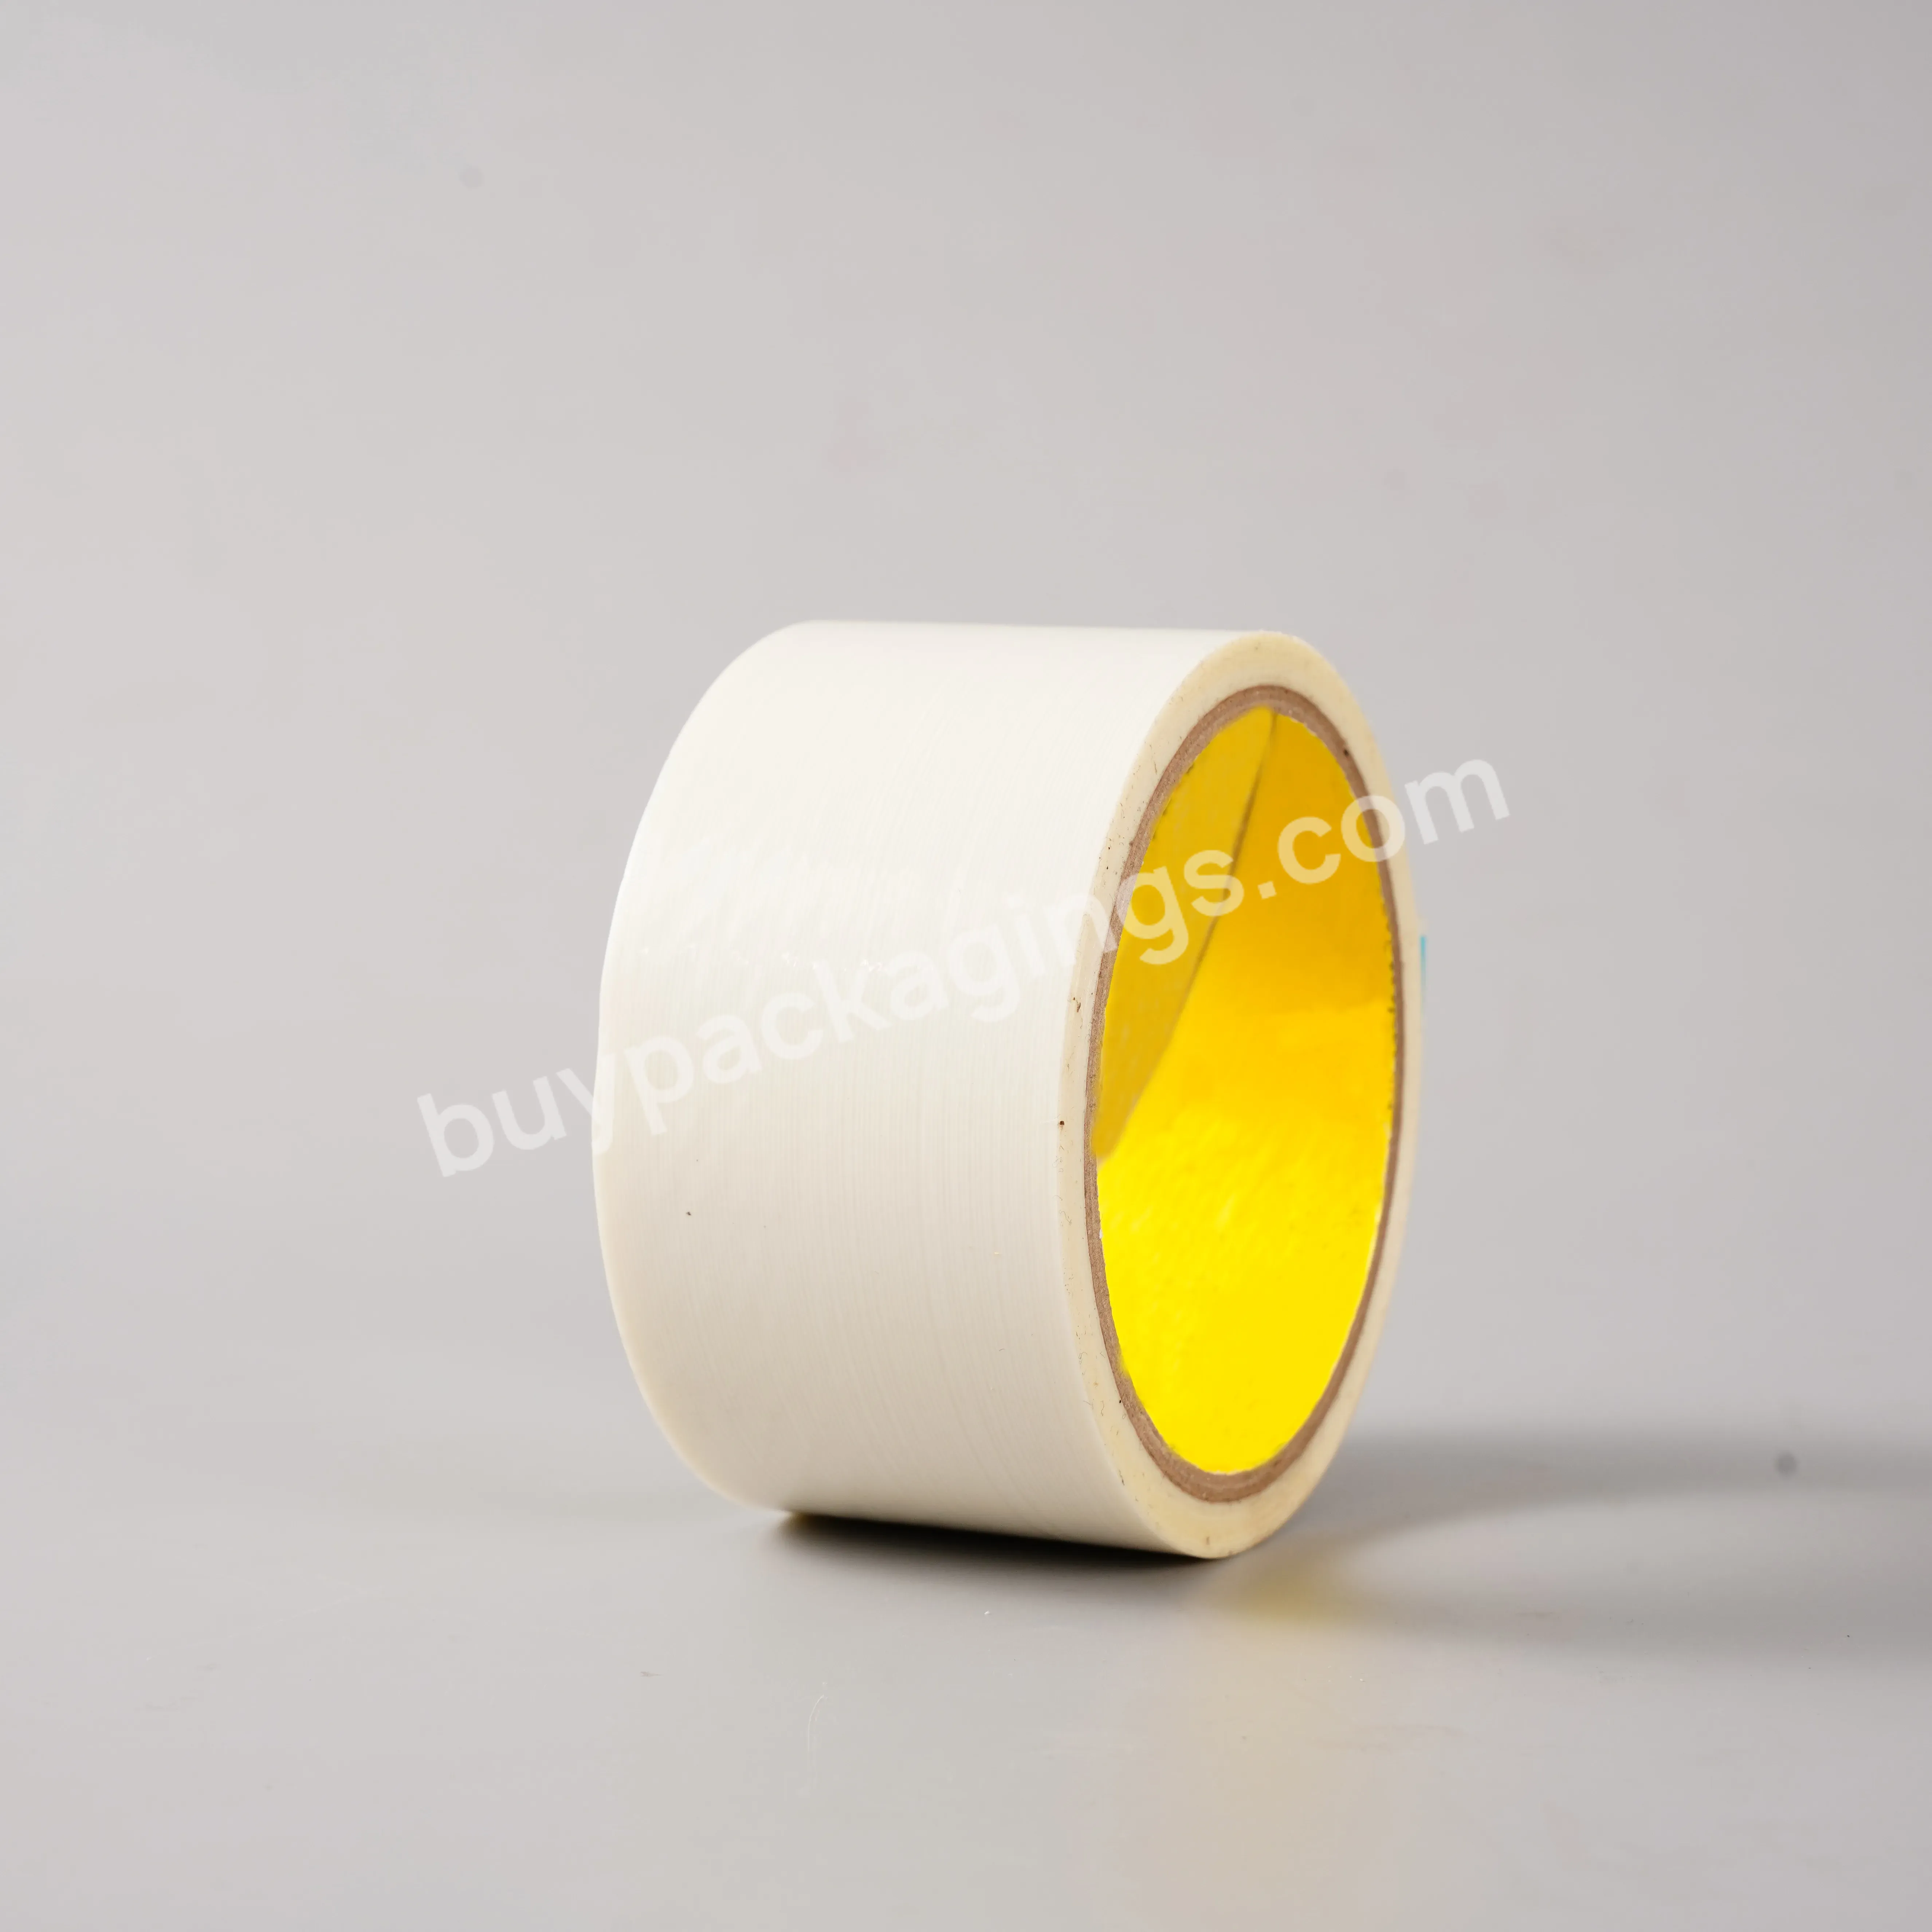 Manufacturers Direct Sales Of Encrypted Glass Fiber Tape Without Trace For Refrigerator Tape - Buy Glass Cltoh Silicone Tap,Fiberglass Packaging Tape,Cross Weave Tape.